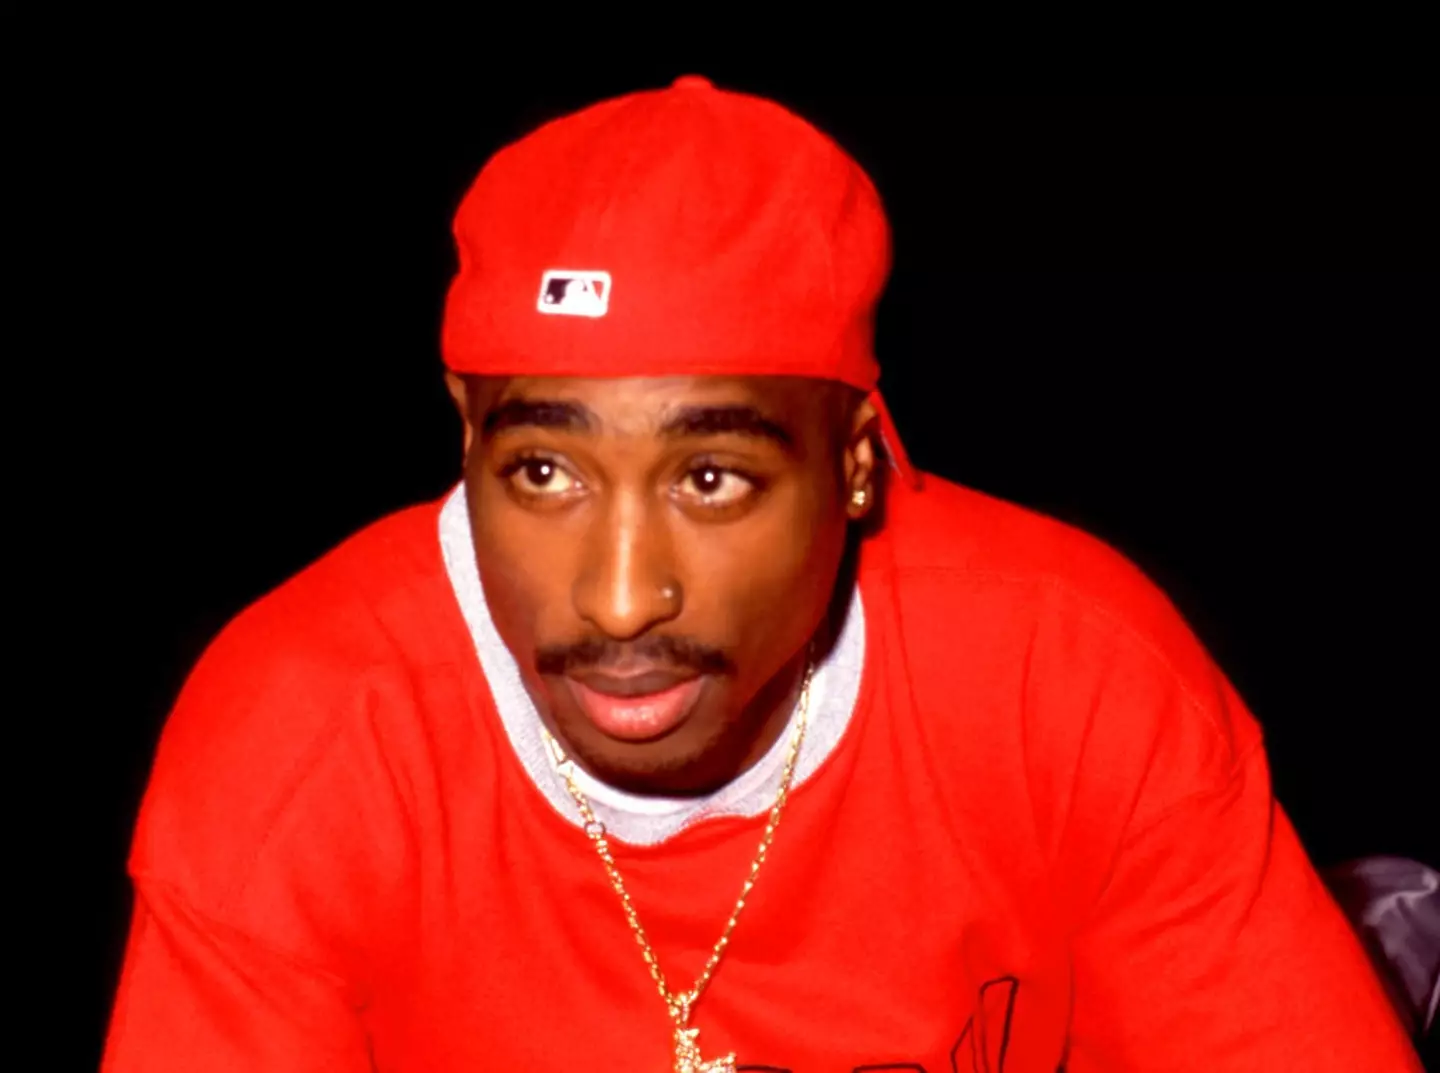 Shakur was just 25 years old when he was killed.